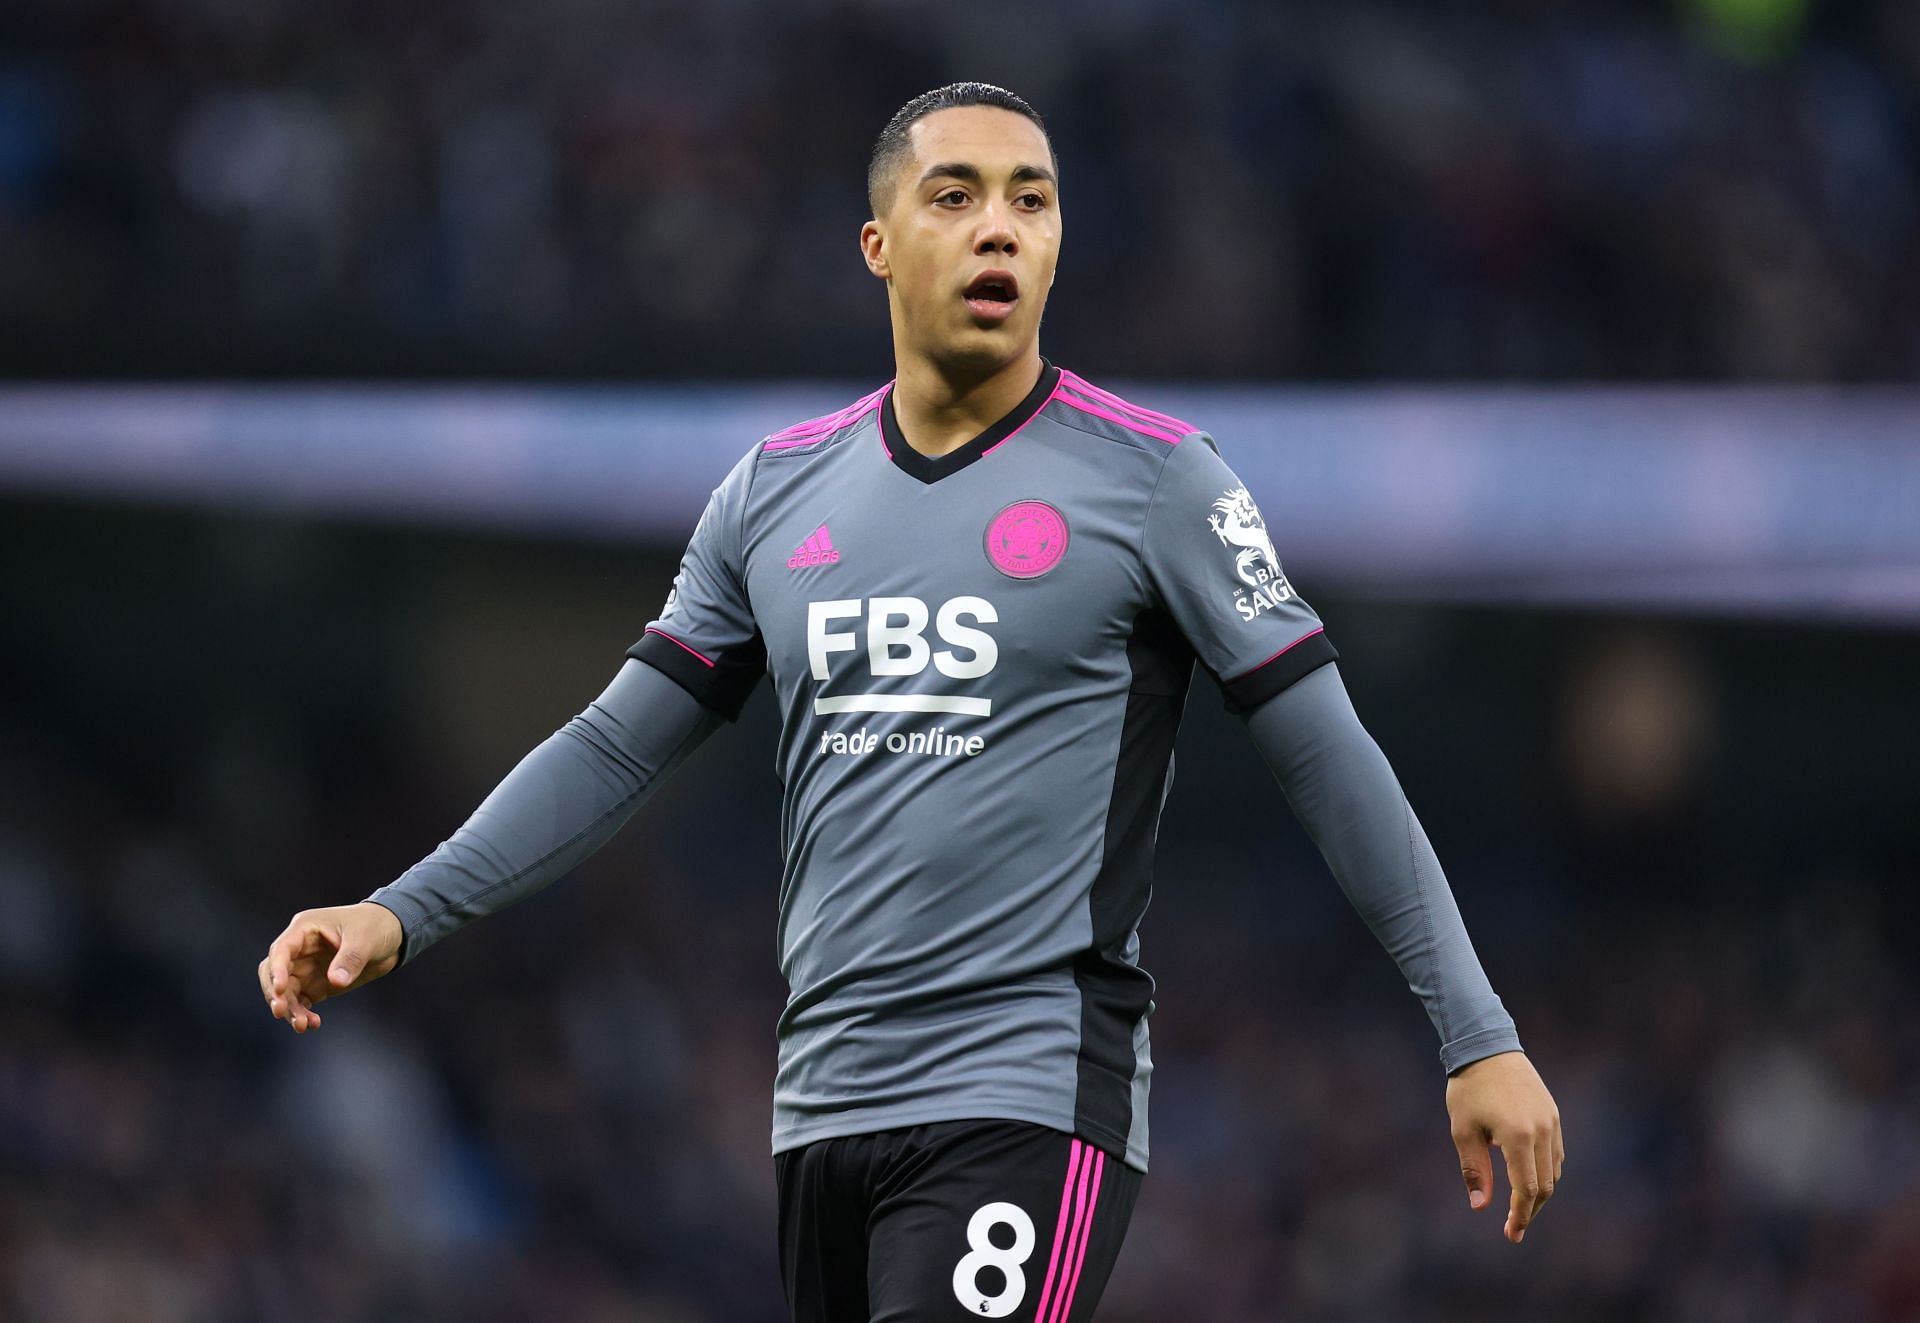 The Gunners are willing to offer &euro;60 million for Youri Tielemans.